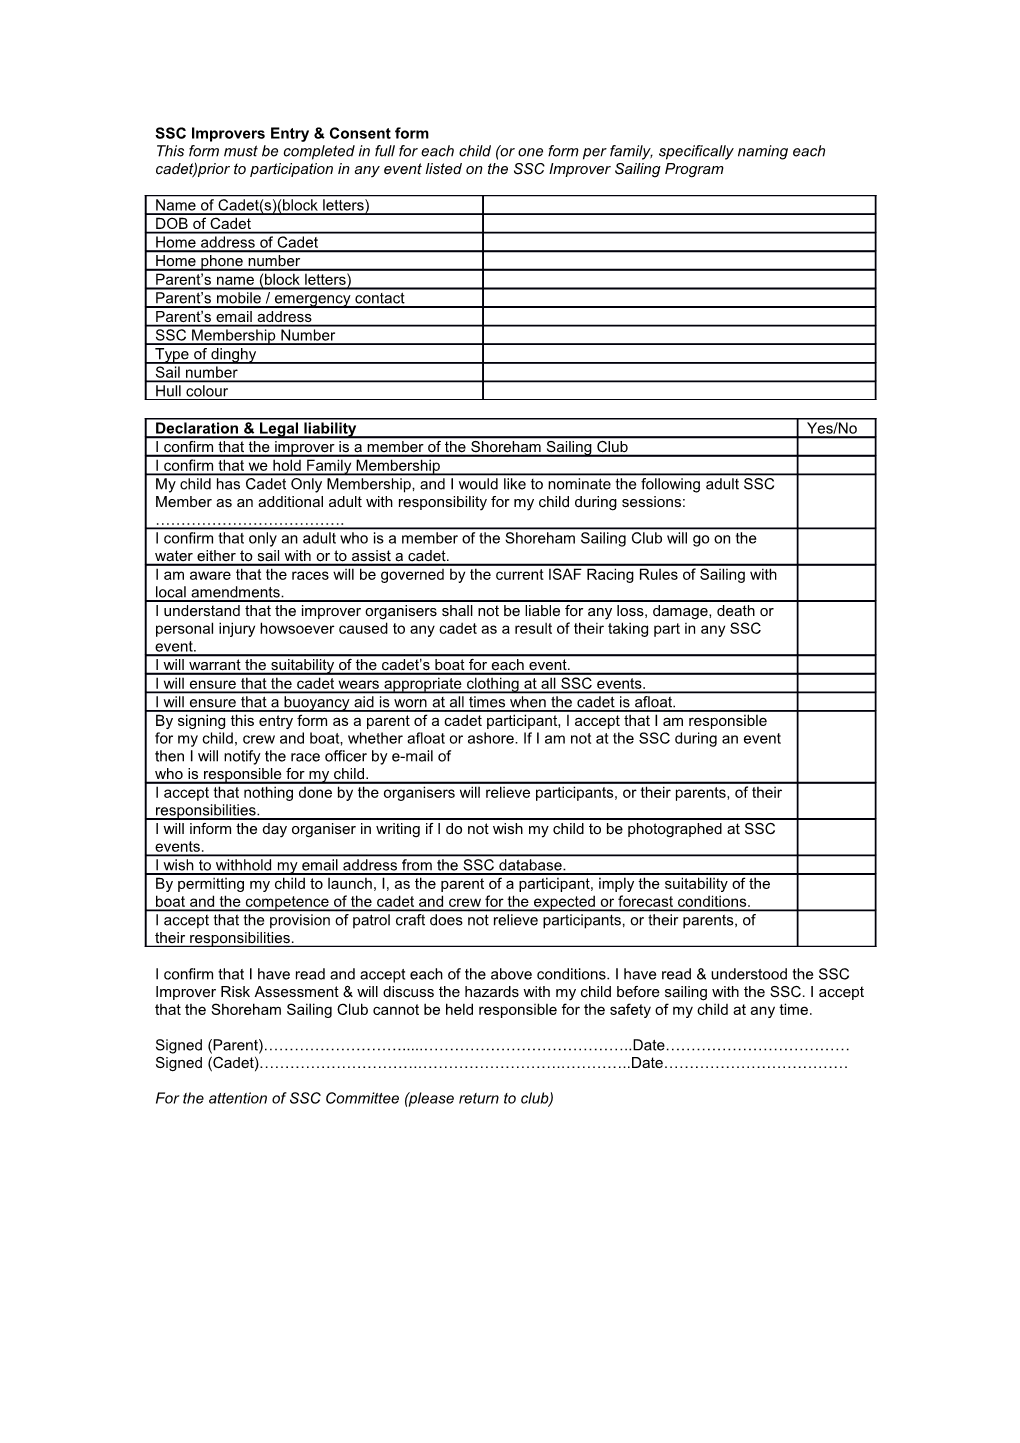 SSC Improvers Entry & Consent Form